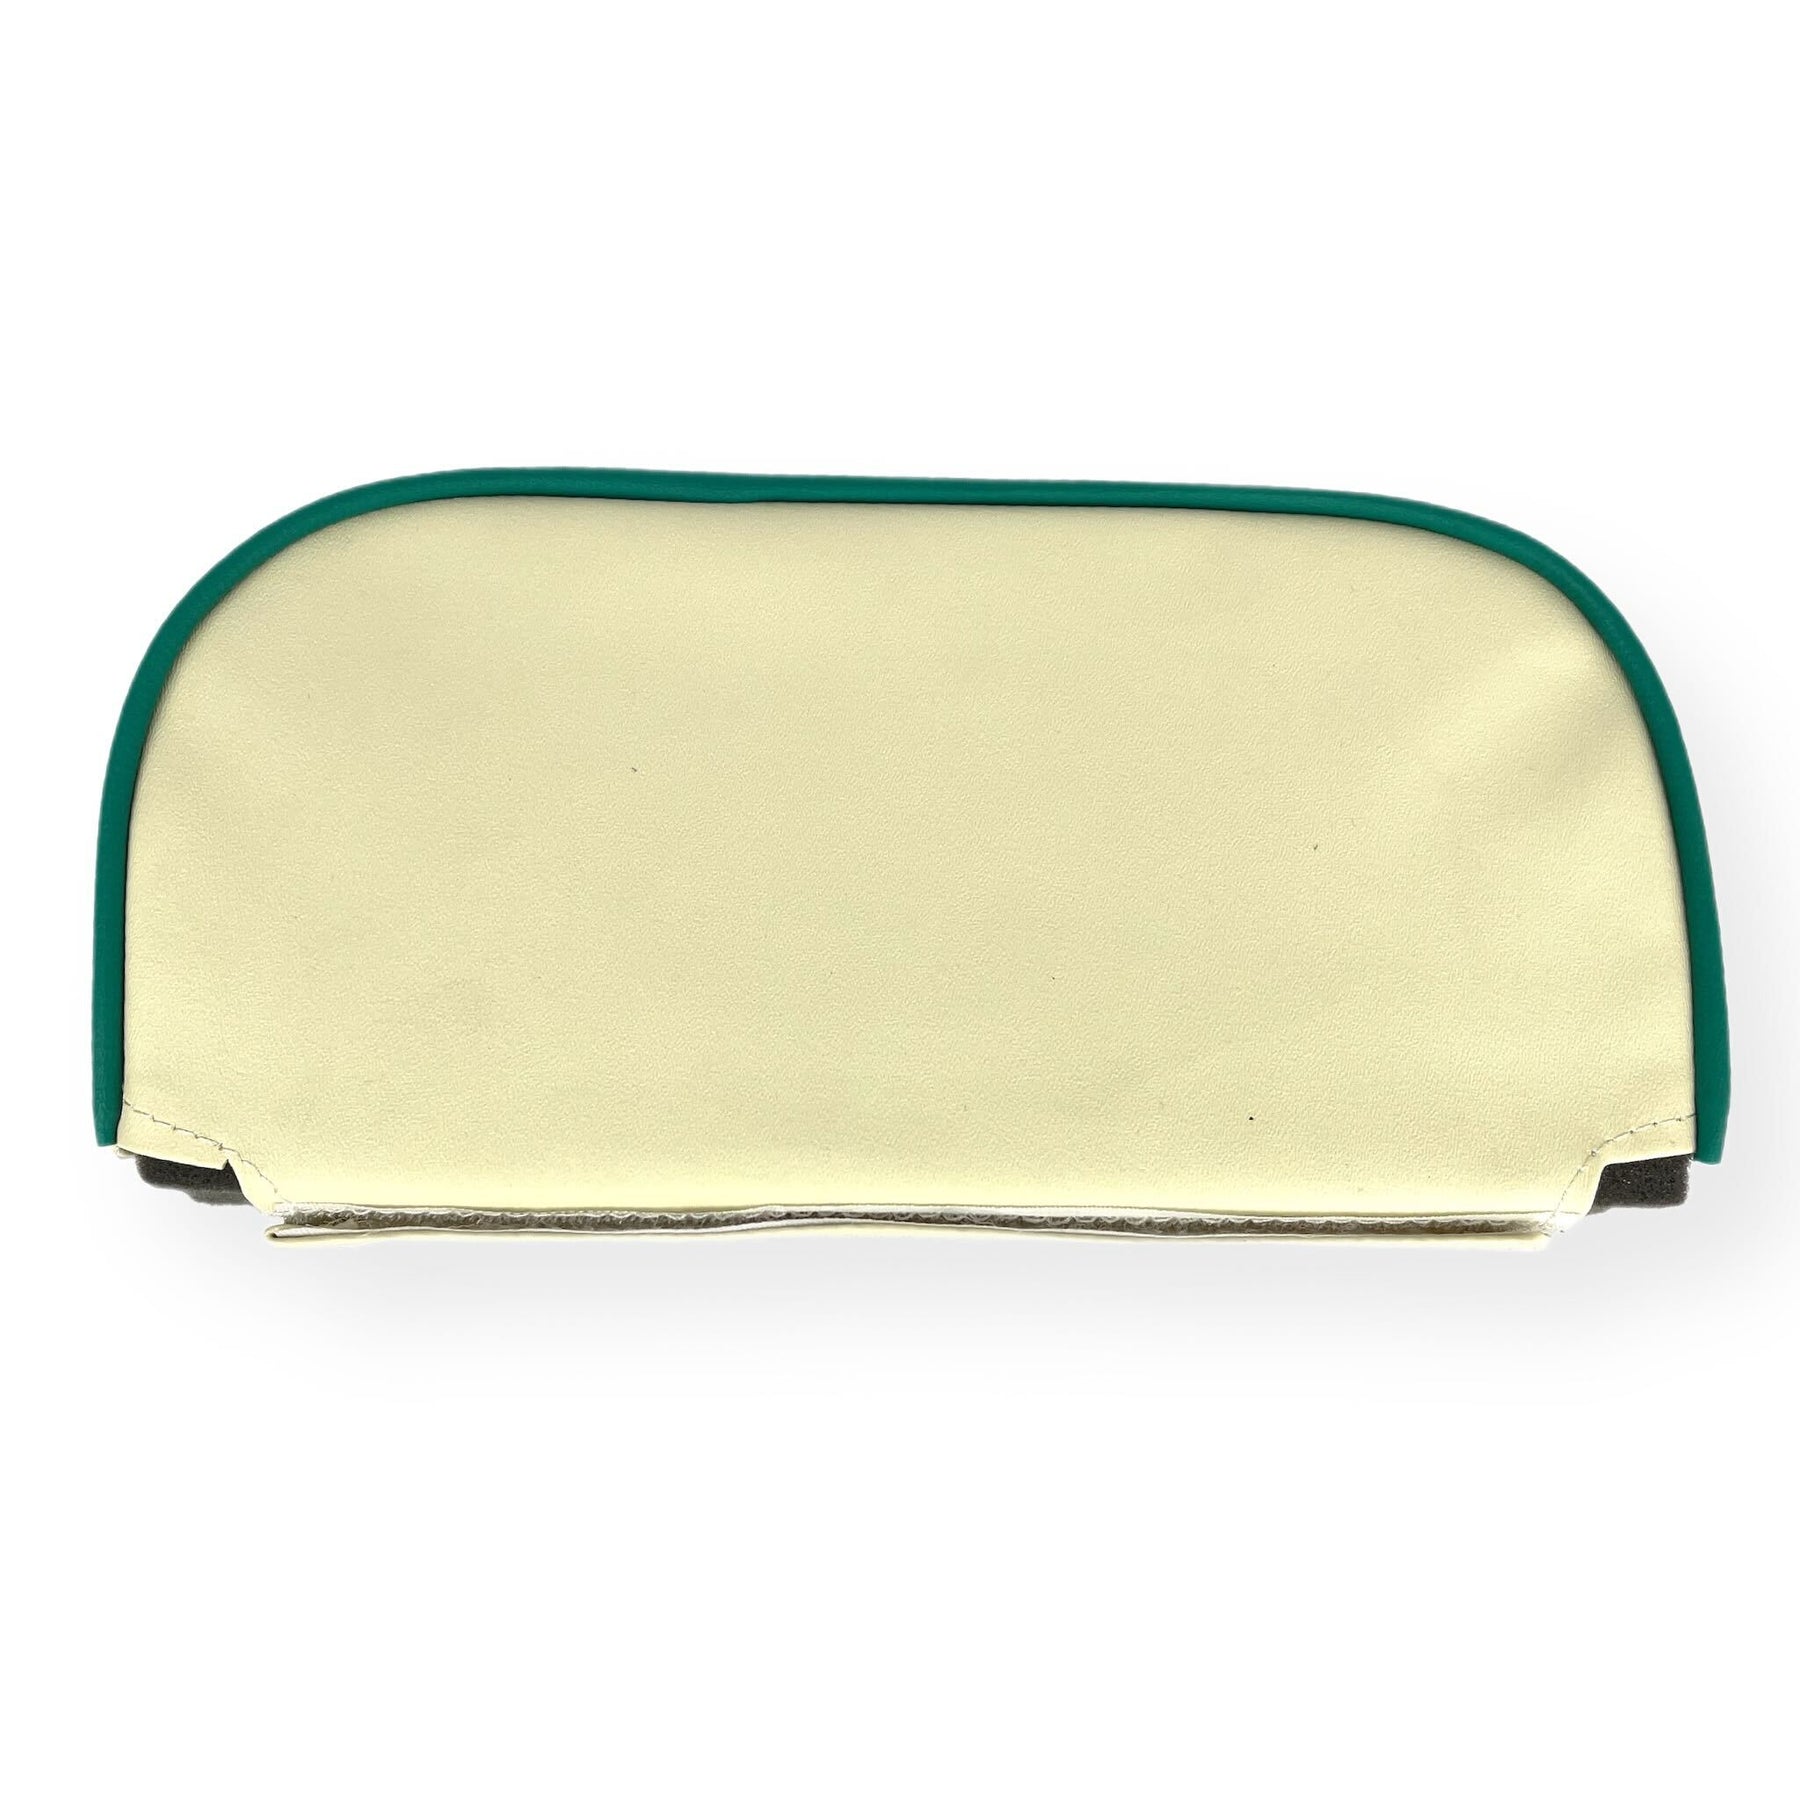 Vespa Lambretta Cuppini Carrier Backrest - Replacement Pad - Cream With Forest Green Piping